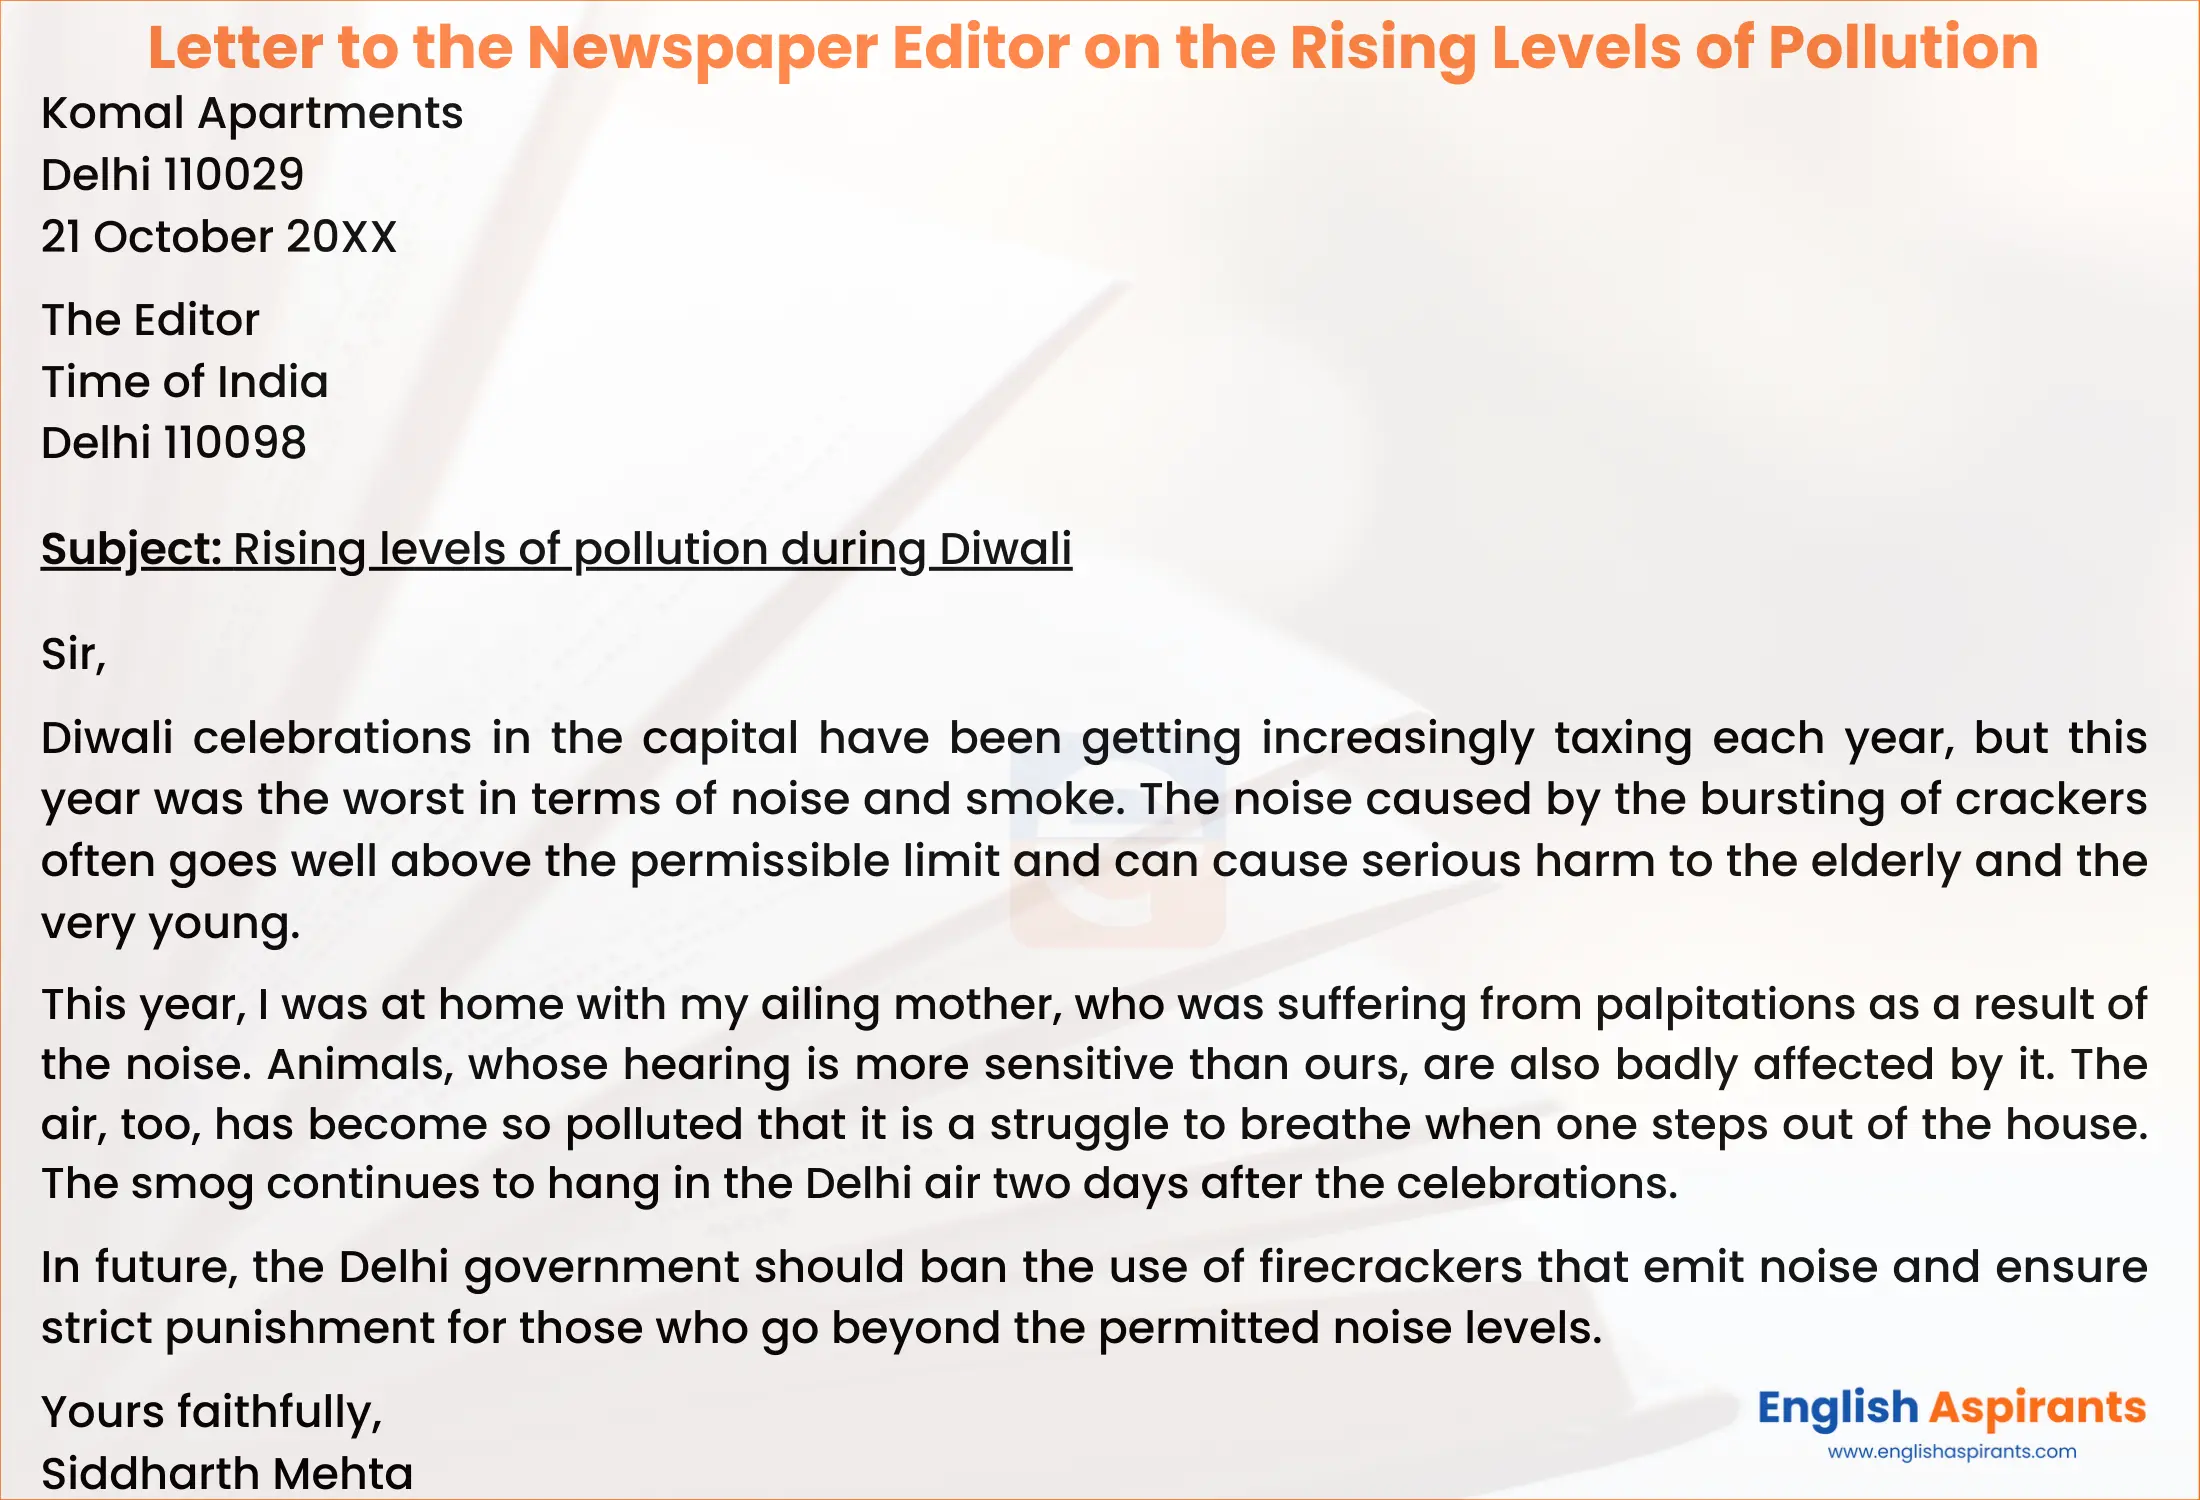 Letter to the Newspaper Editor on the Rising Levels of Pollution During Diwali